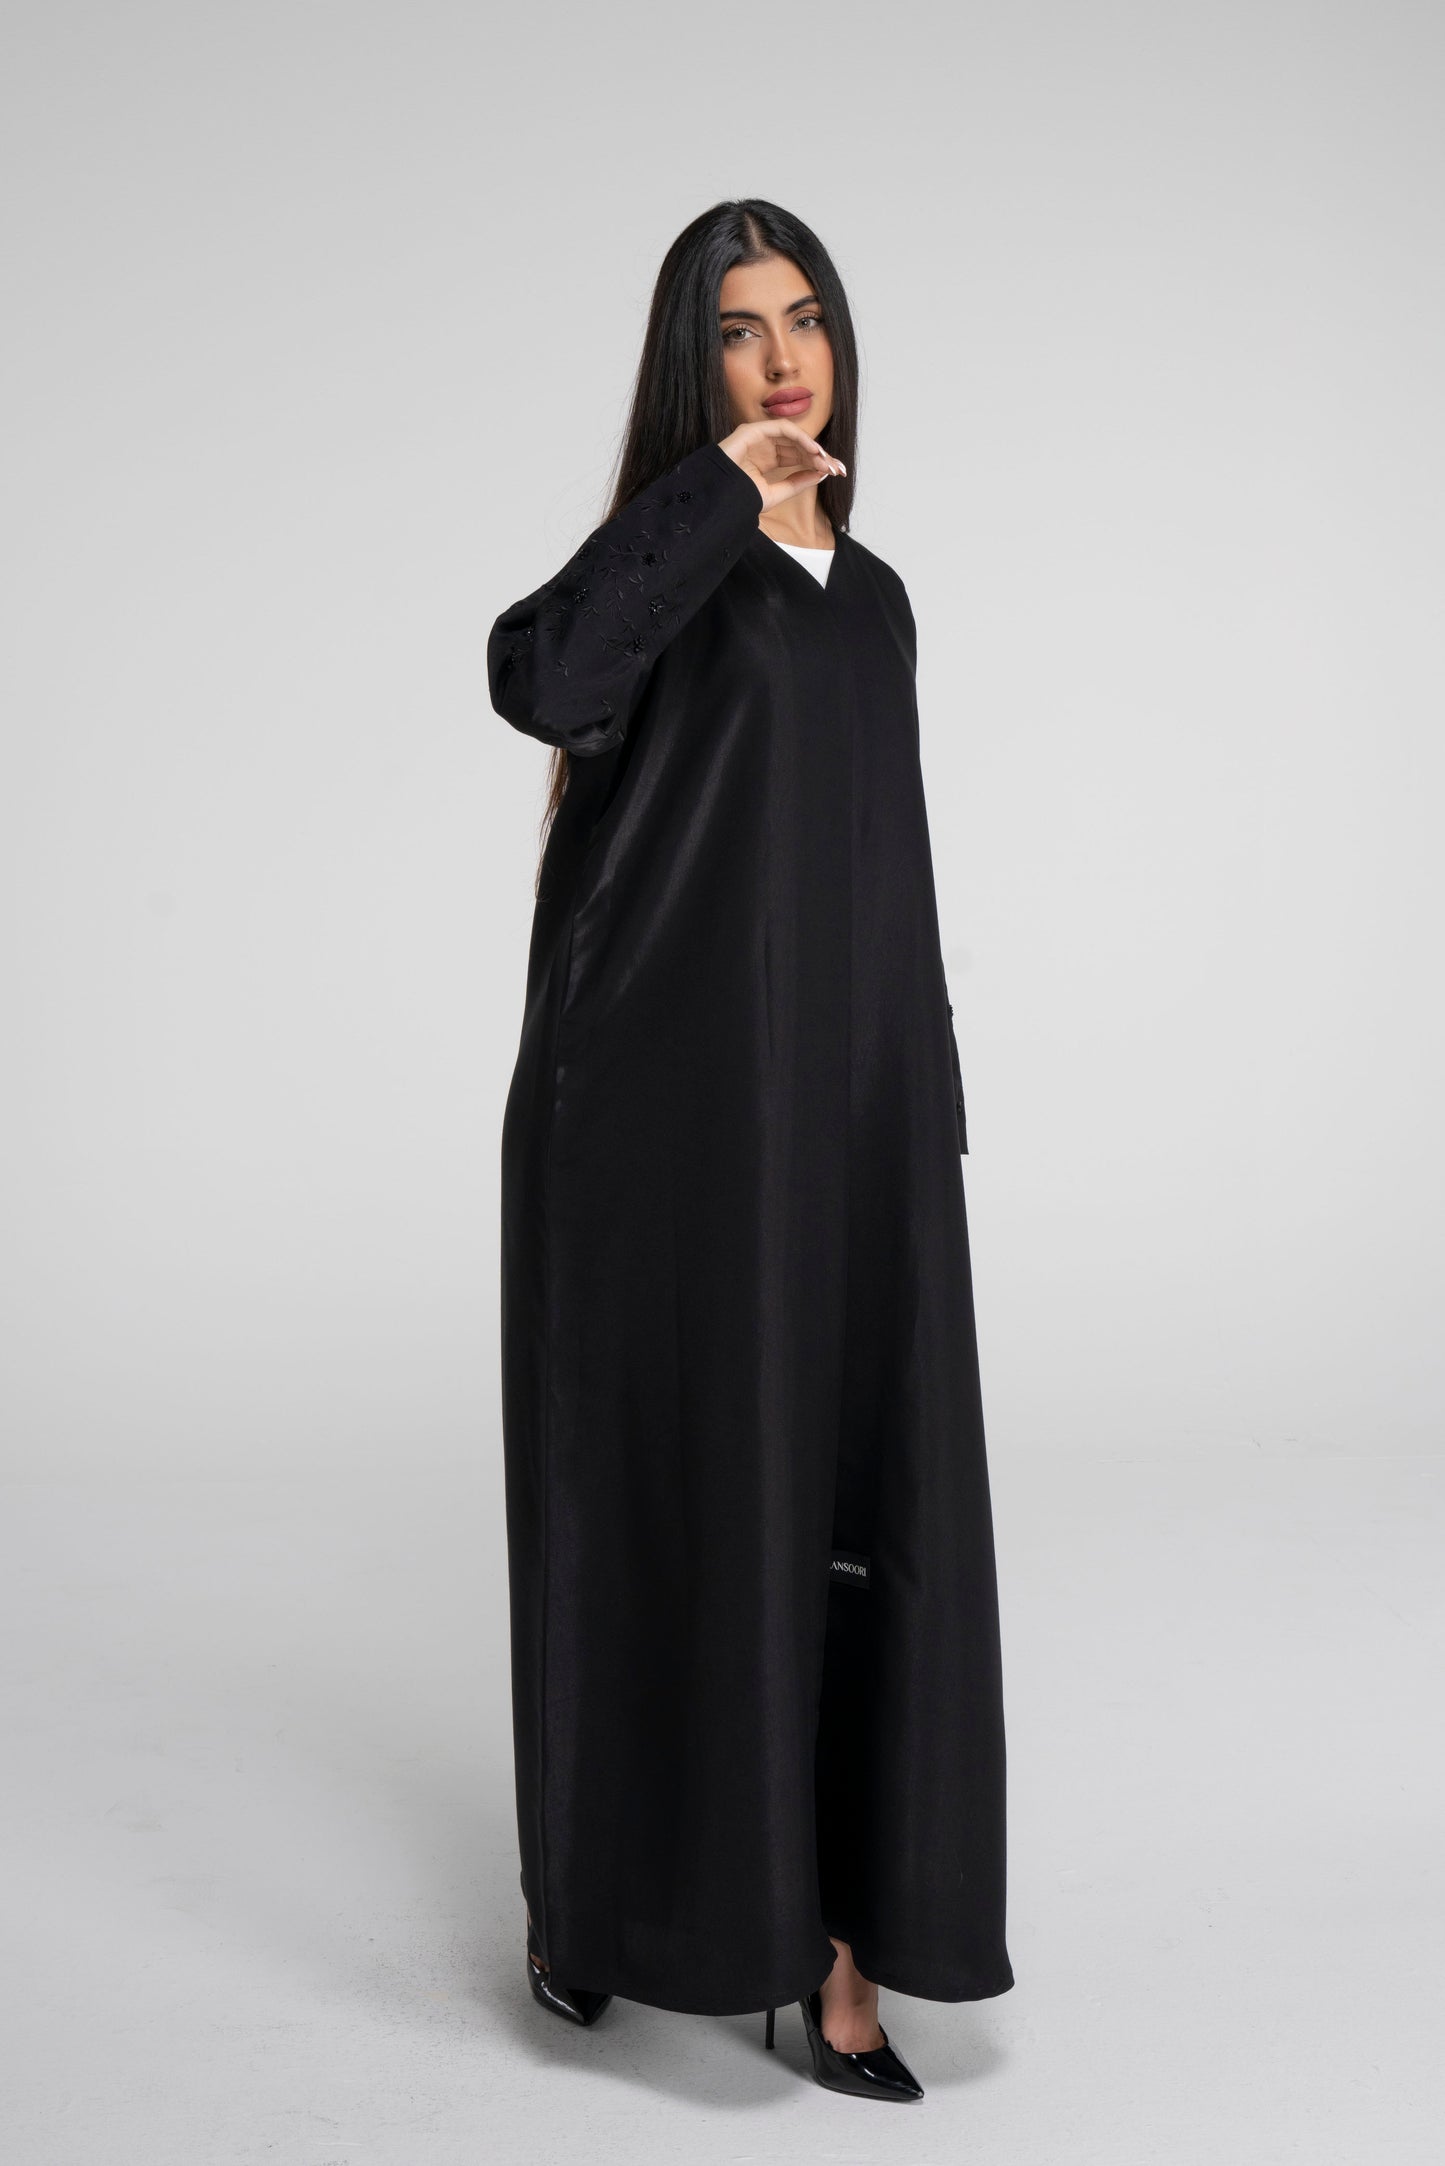 Detailed view of black abaya with floral embroidered sleeves with bead embellishment.